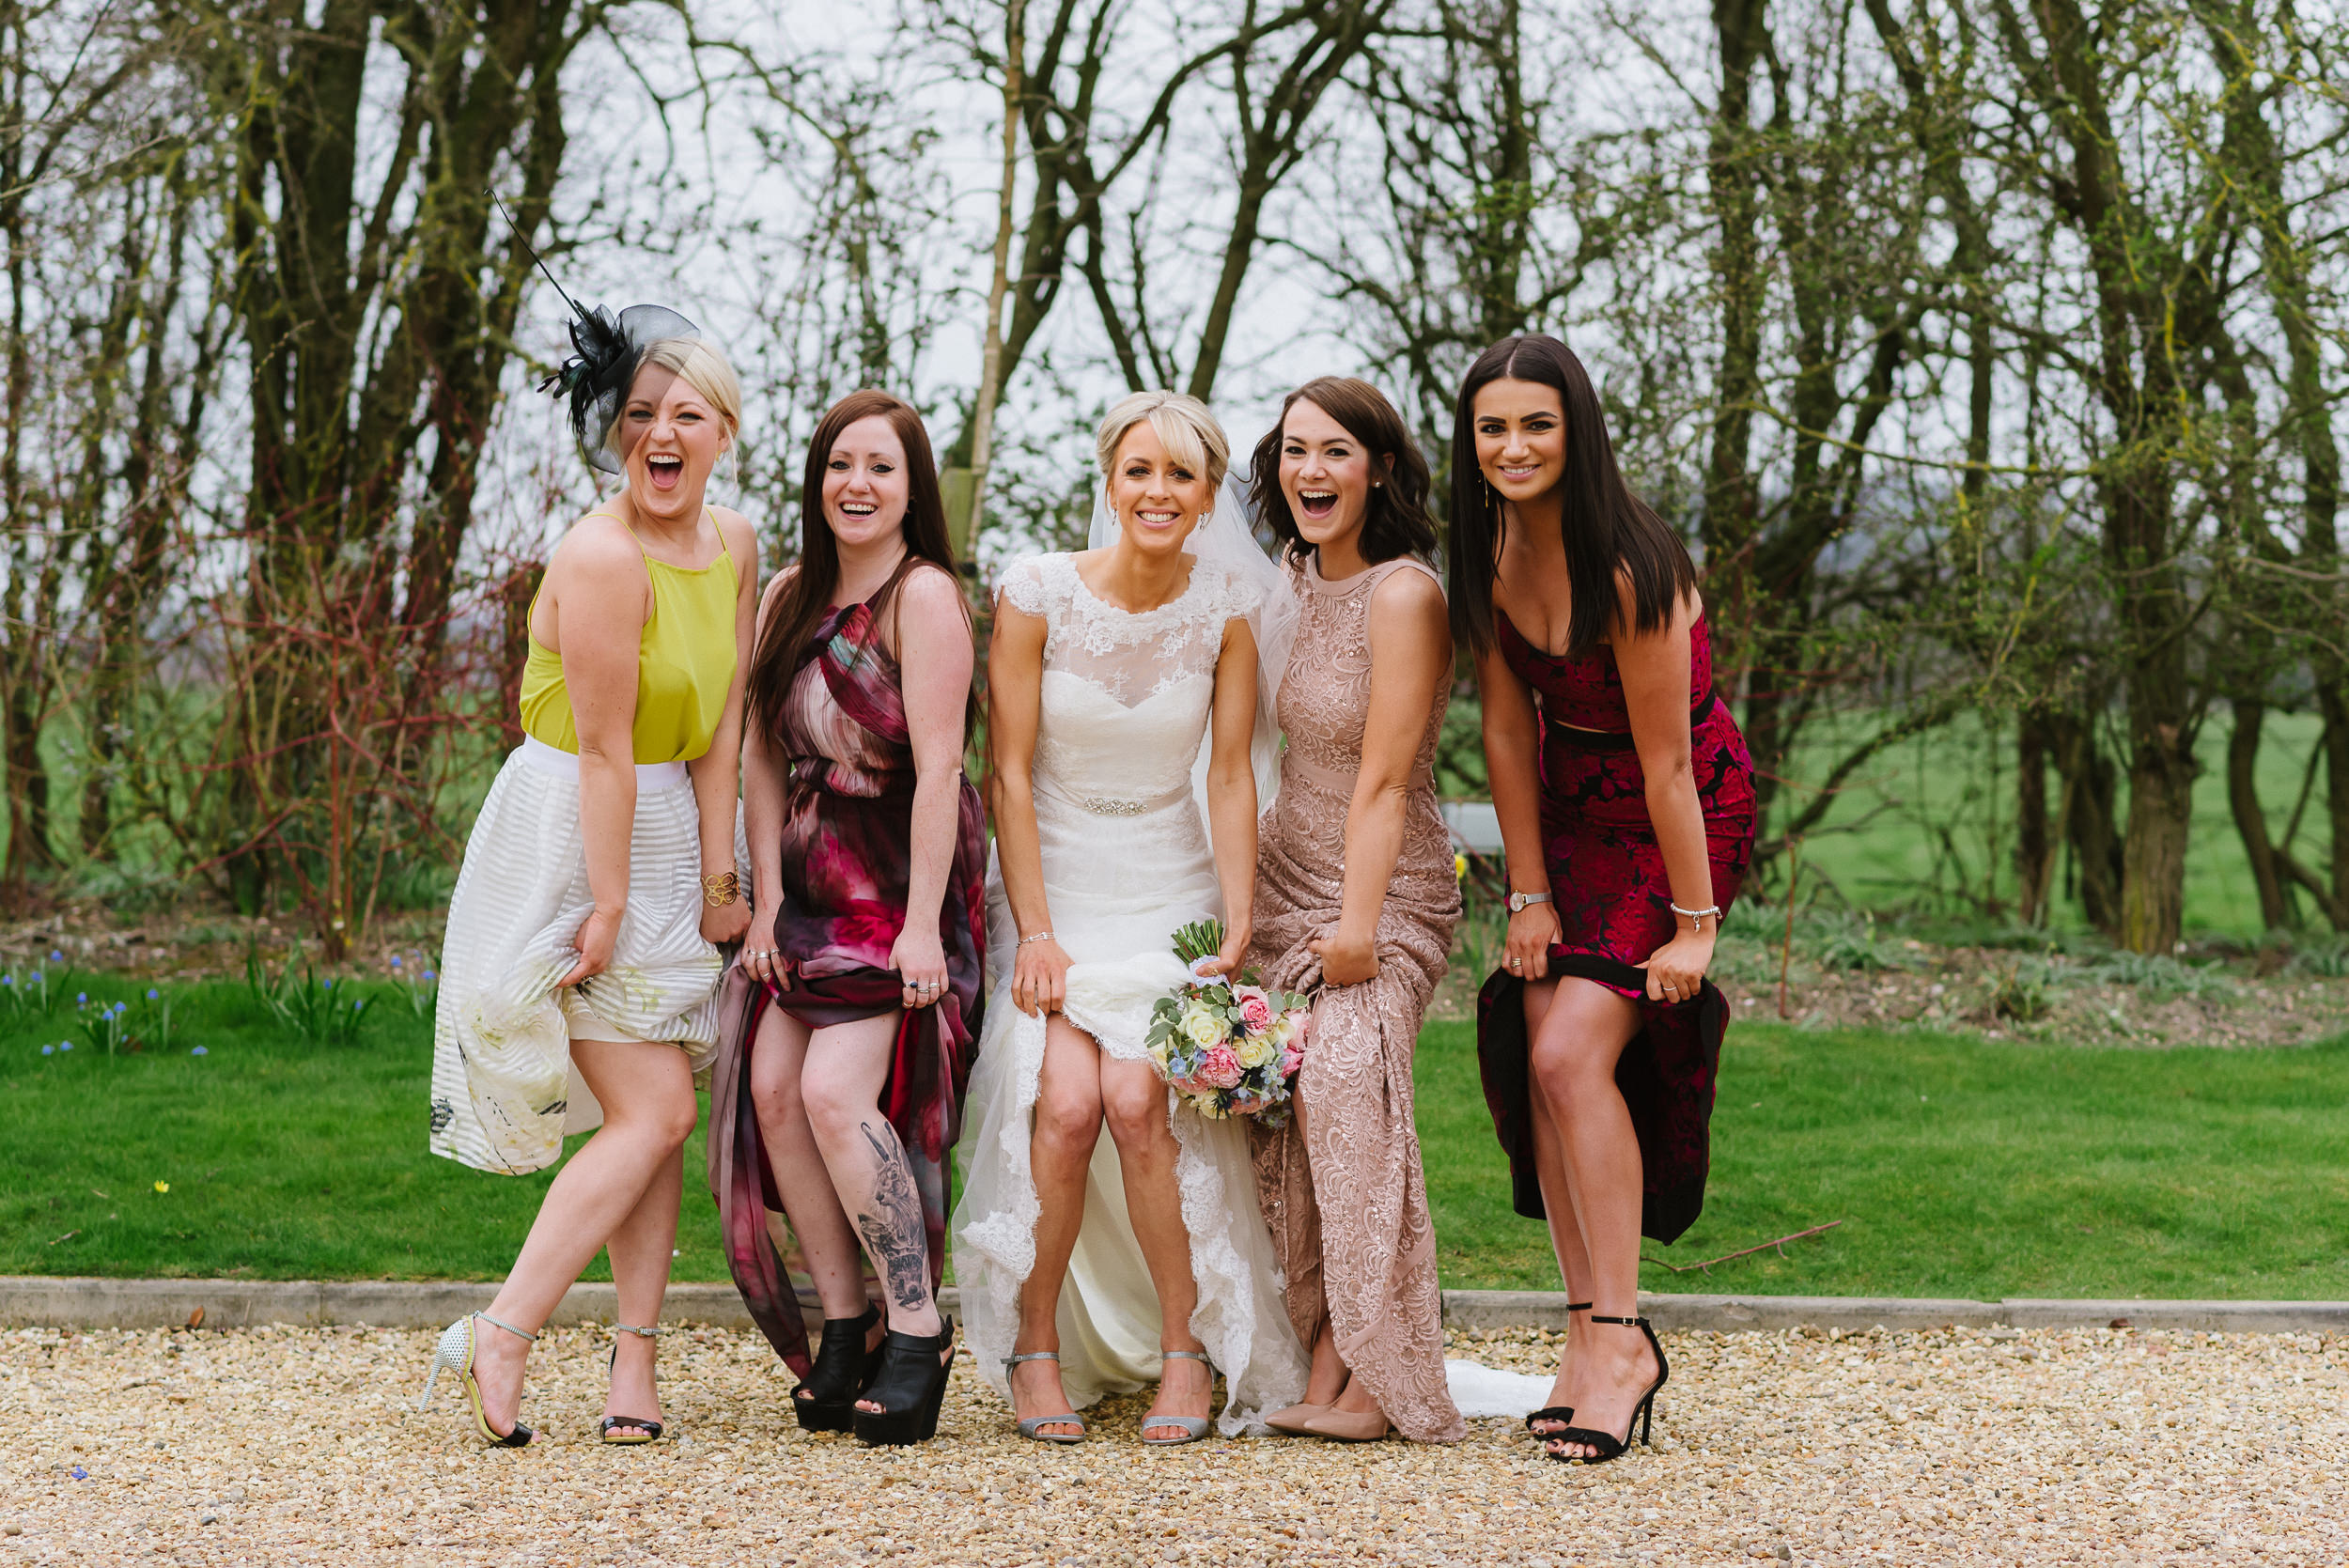 Bride and friends on her wedding day